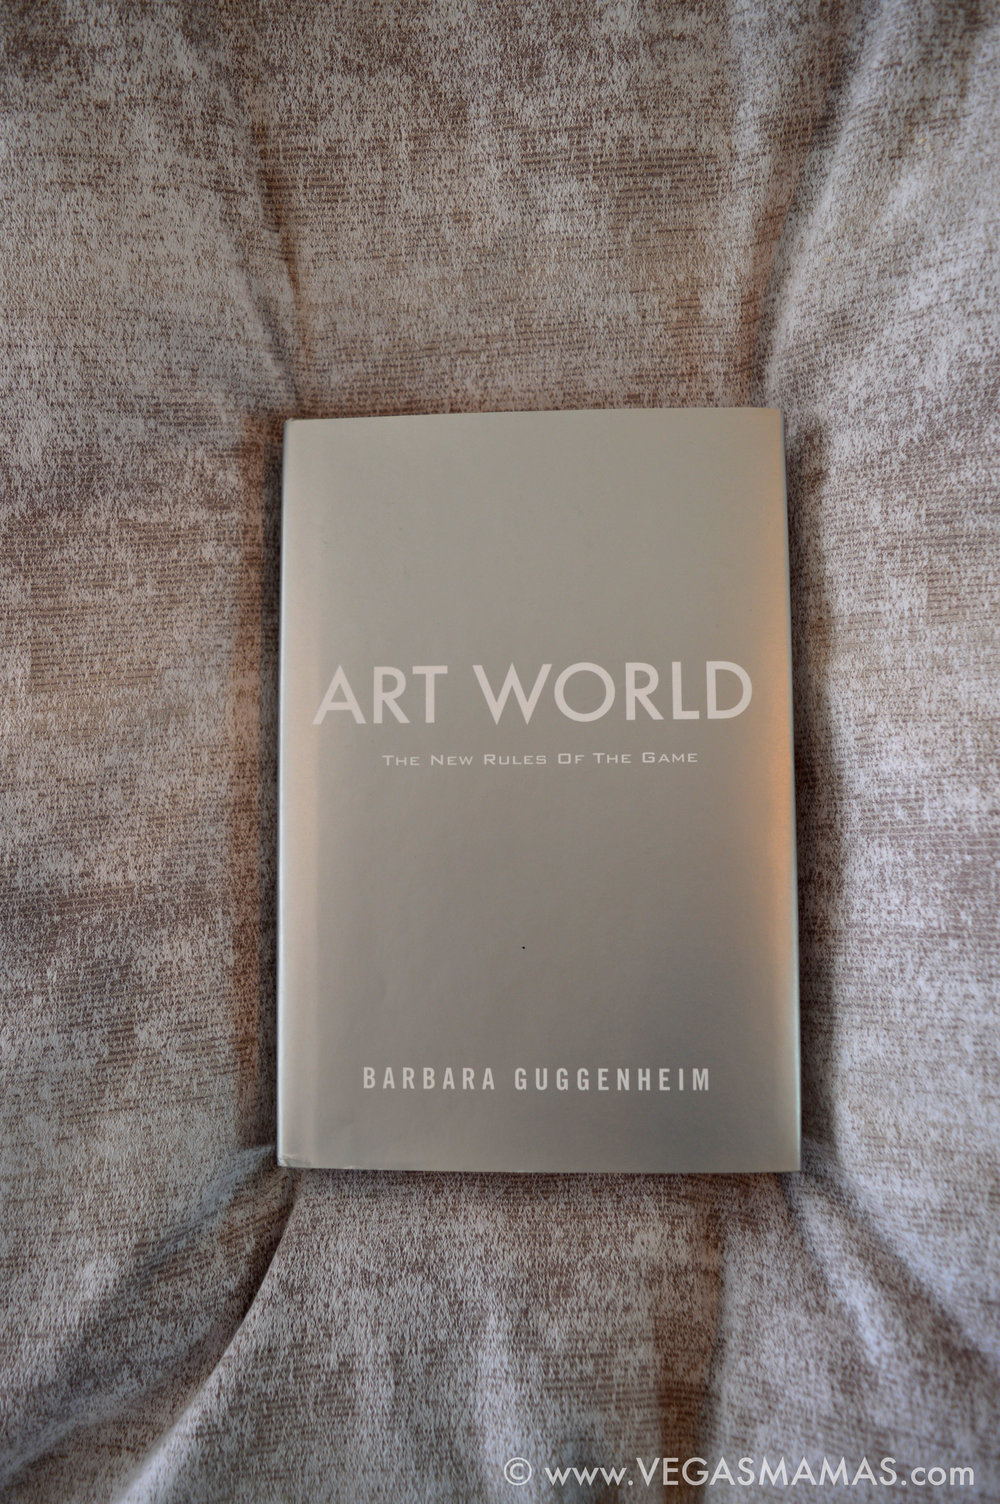 Currently reading Barbara Guggenheim's "Art World, The New Rules of the Game"